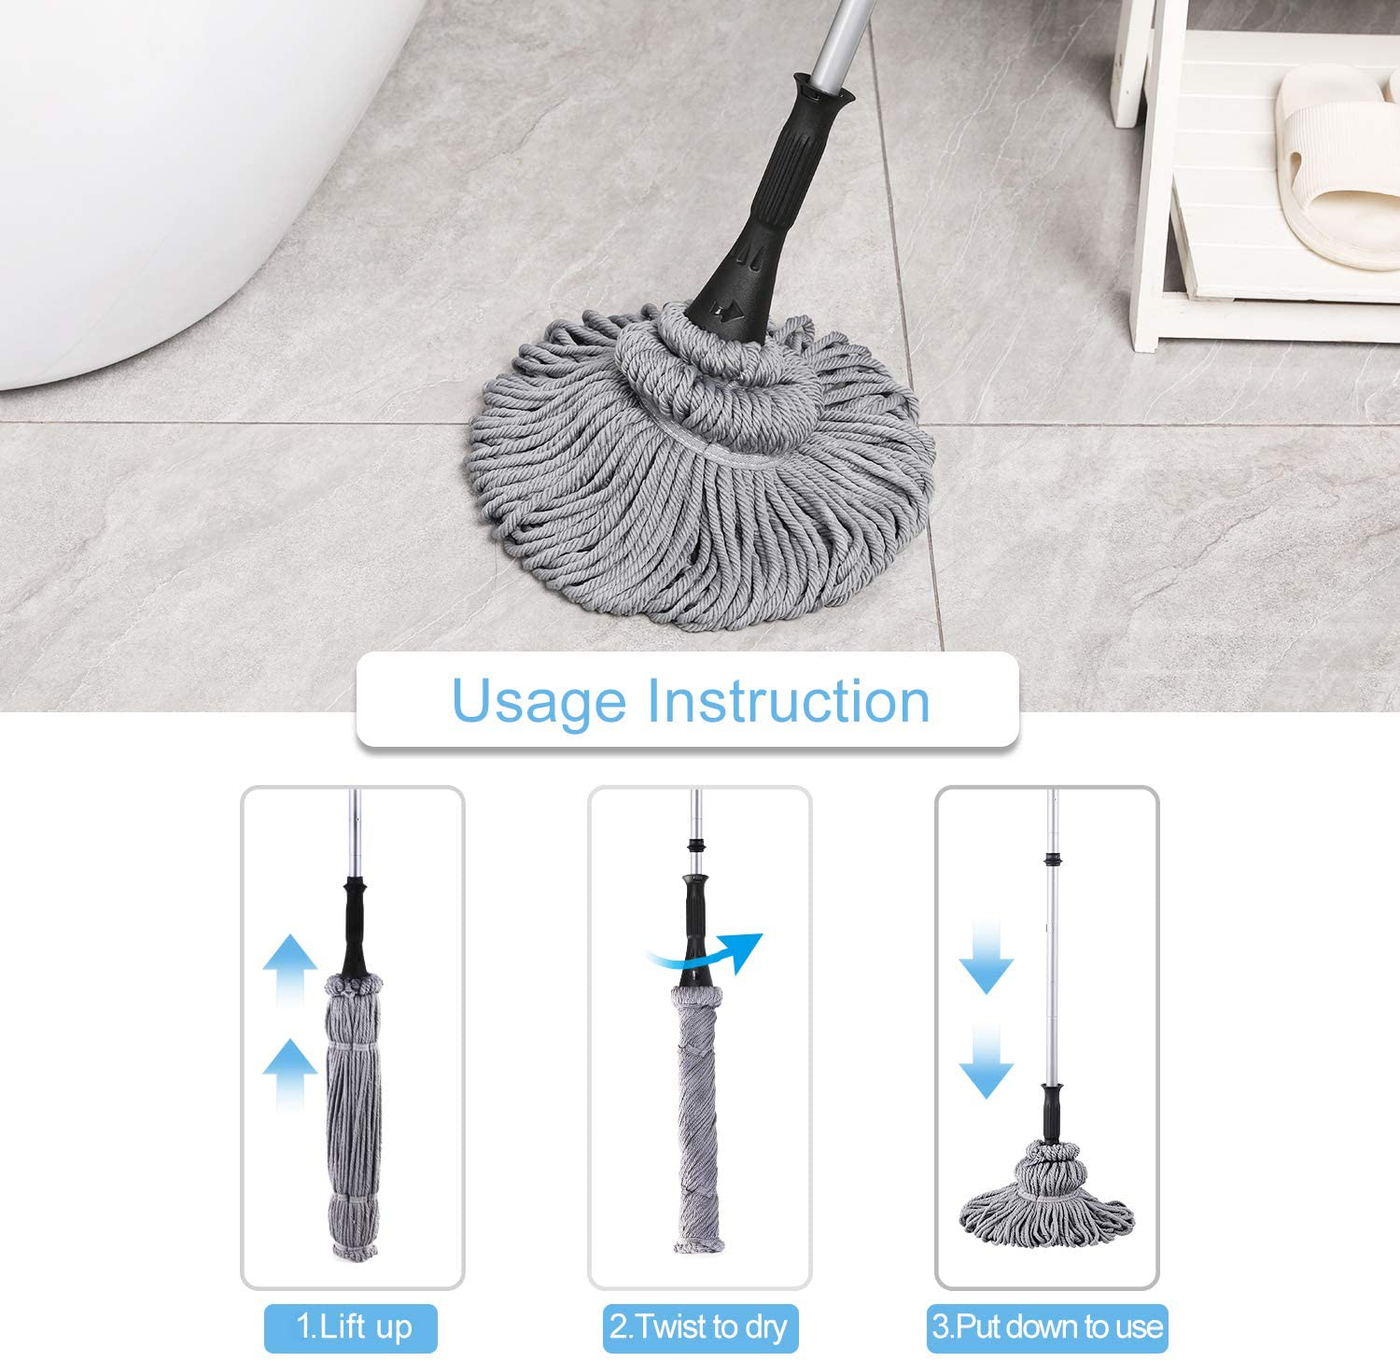 Eyliden Twist Mop & Refills Kit - Hand Release - Dry & Wet Mops for Hardwood, Tile Floor Cleaning - Easy to Wring, Include 2 Replacement Heads, 57.7inch Long Handle, Top Scouring Pad (Grey)